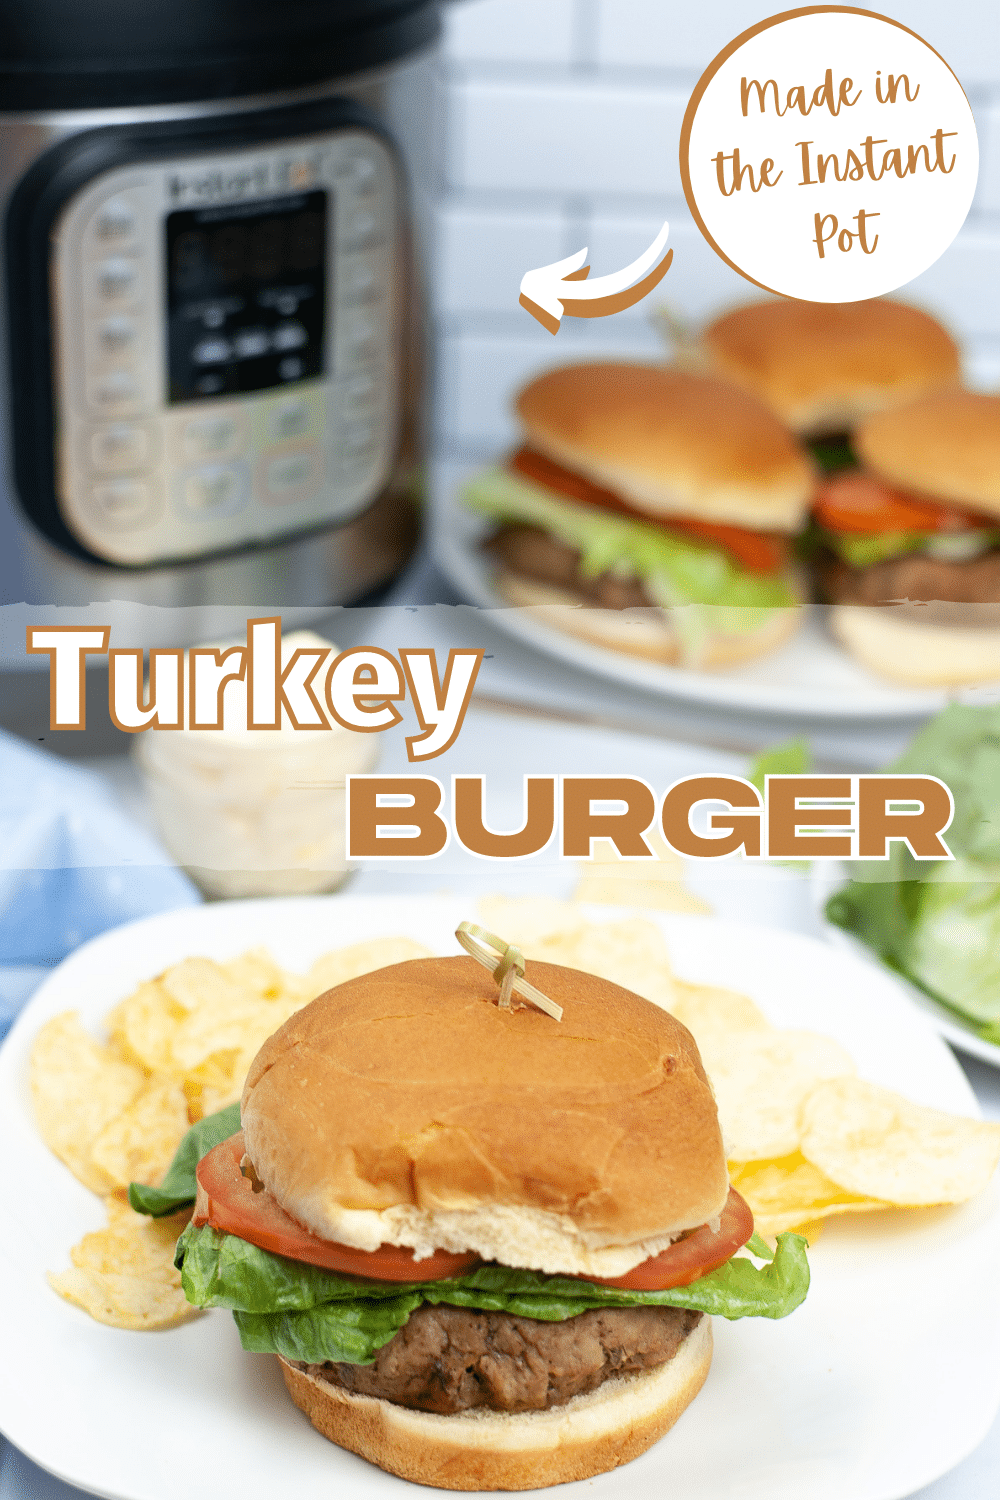 Instant Pot Turkey Burgers are the perfect easy weeknight meal. They are healthy, flavorful, and take only minutes to make! #instantpot #pressurecooker #turkeyburgers #turkey #recipe via @wondermomwannab